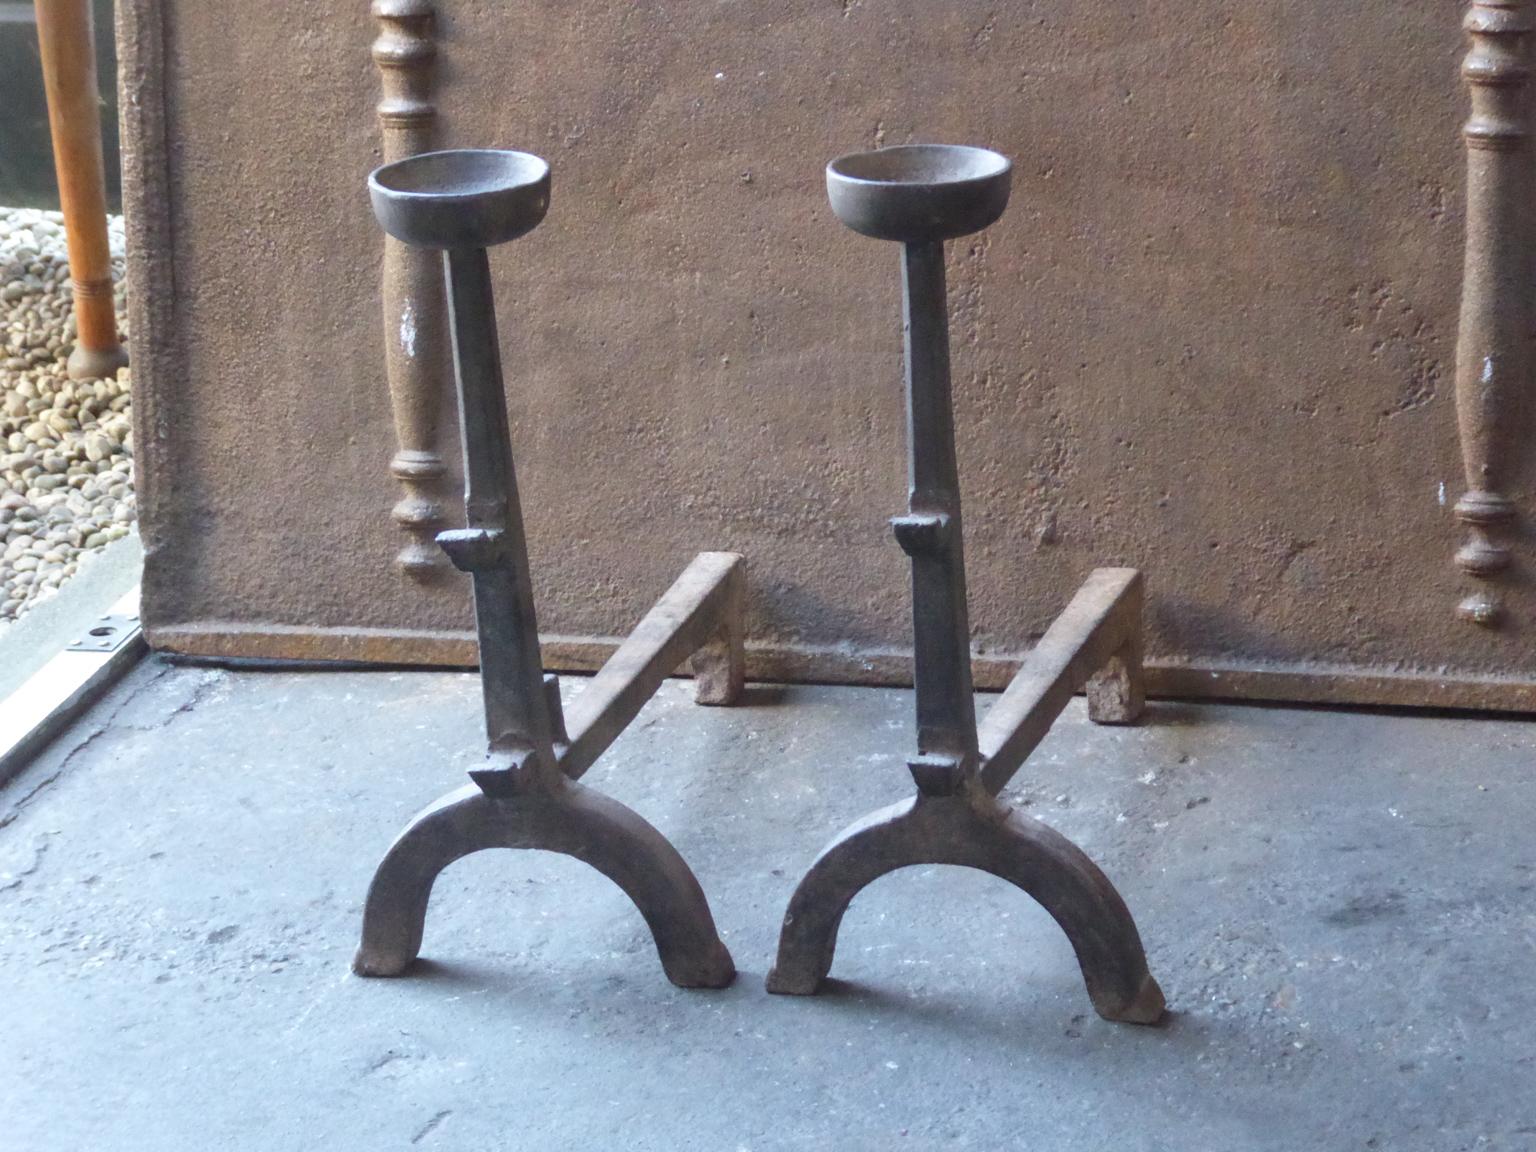 18th-19th century French Gothic style andirons made of cast iron. The andirons have spit hooks to grill food and cups to keep drinks warm. This type of andiron is therefore also called cup dogs.







 